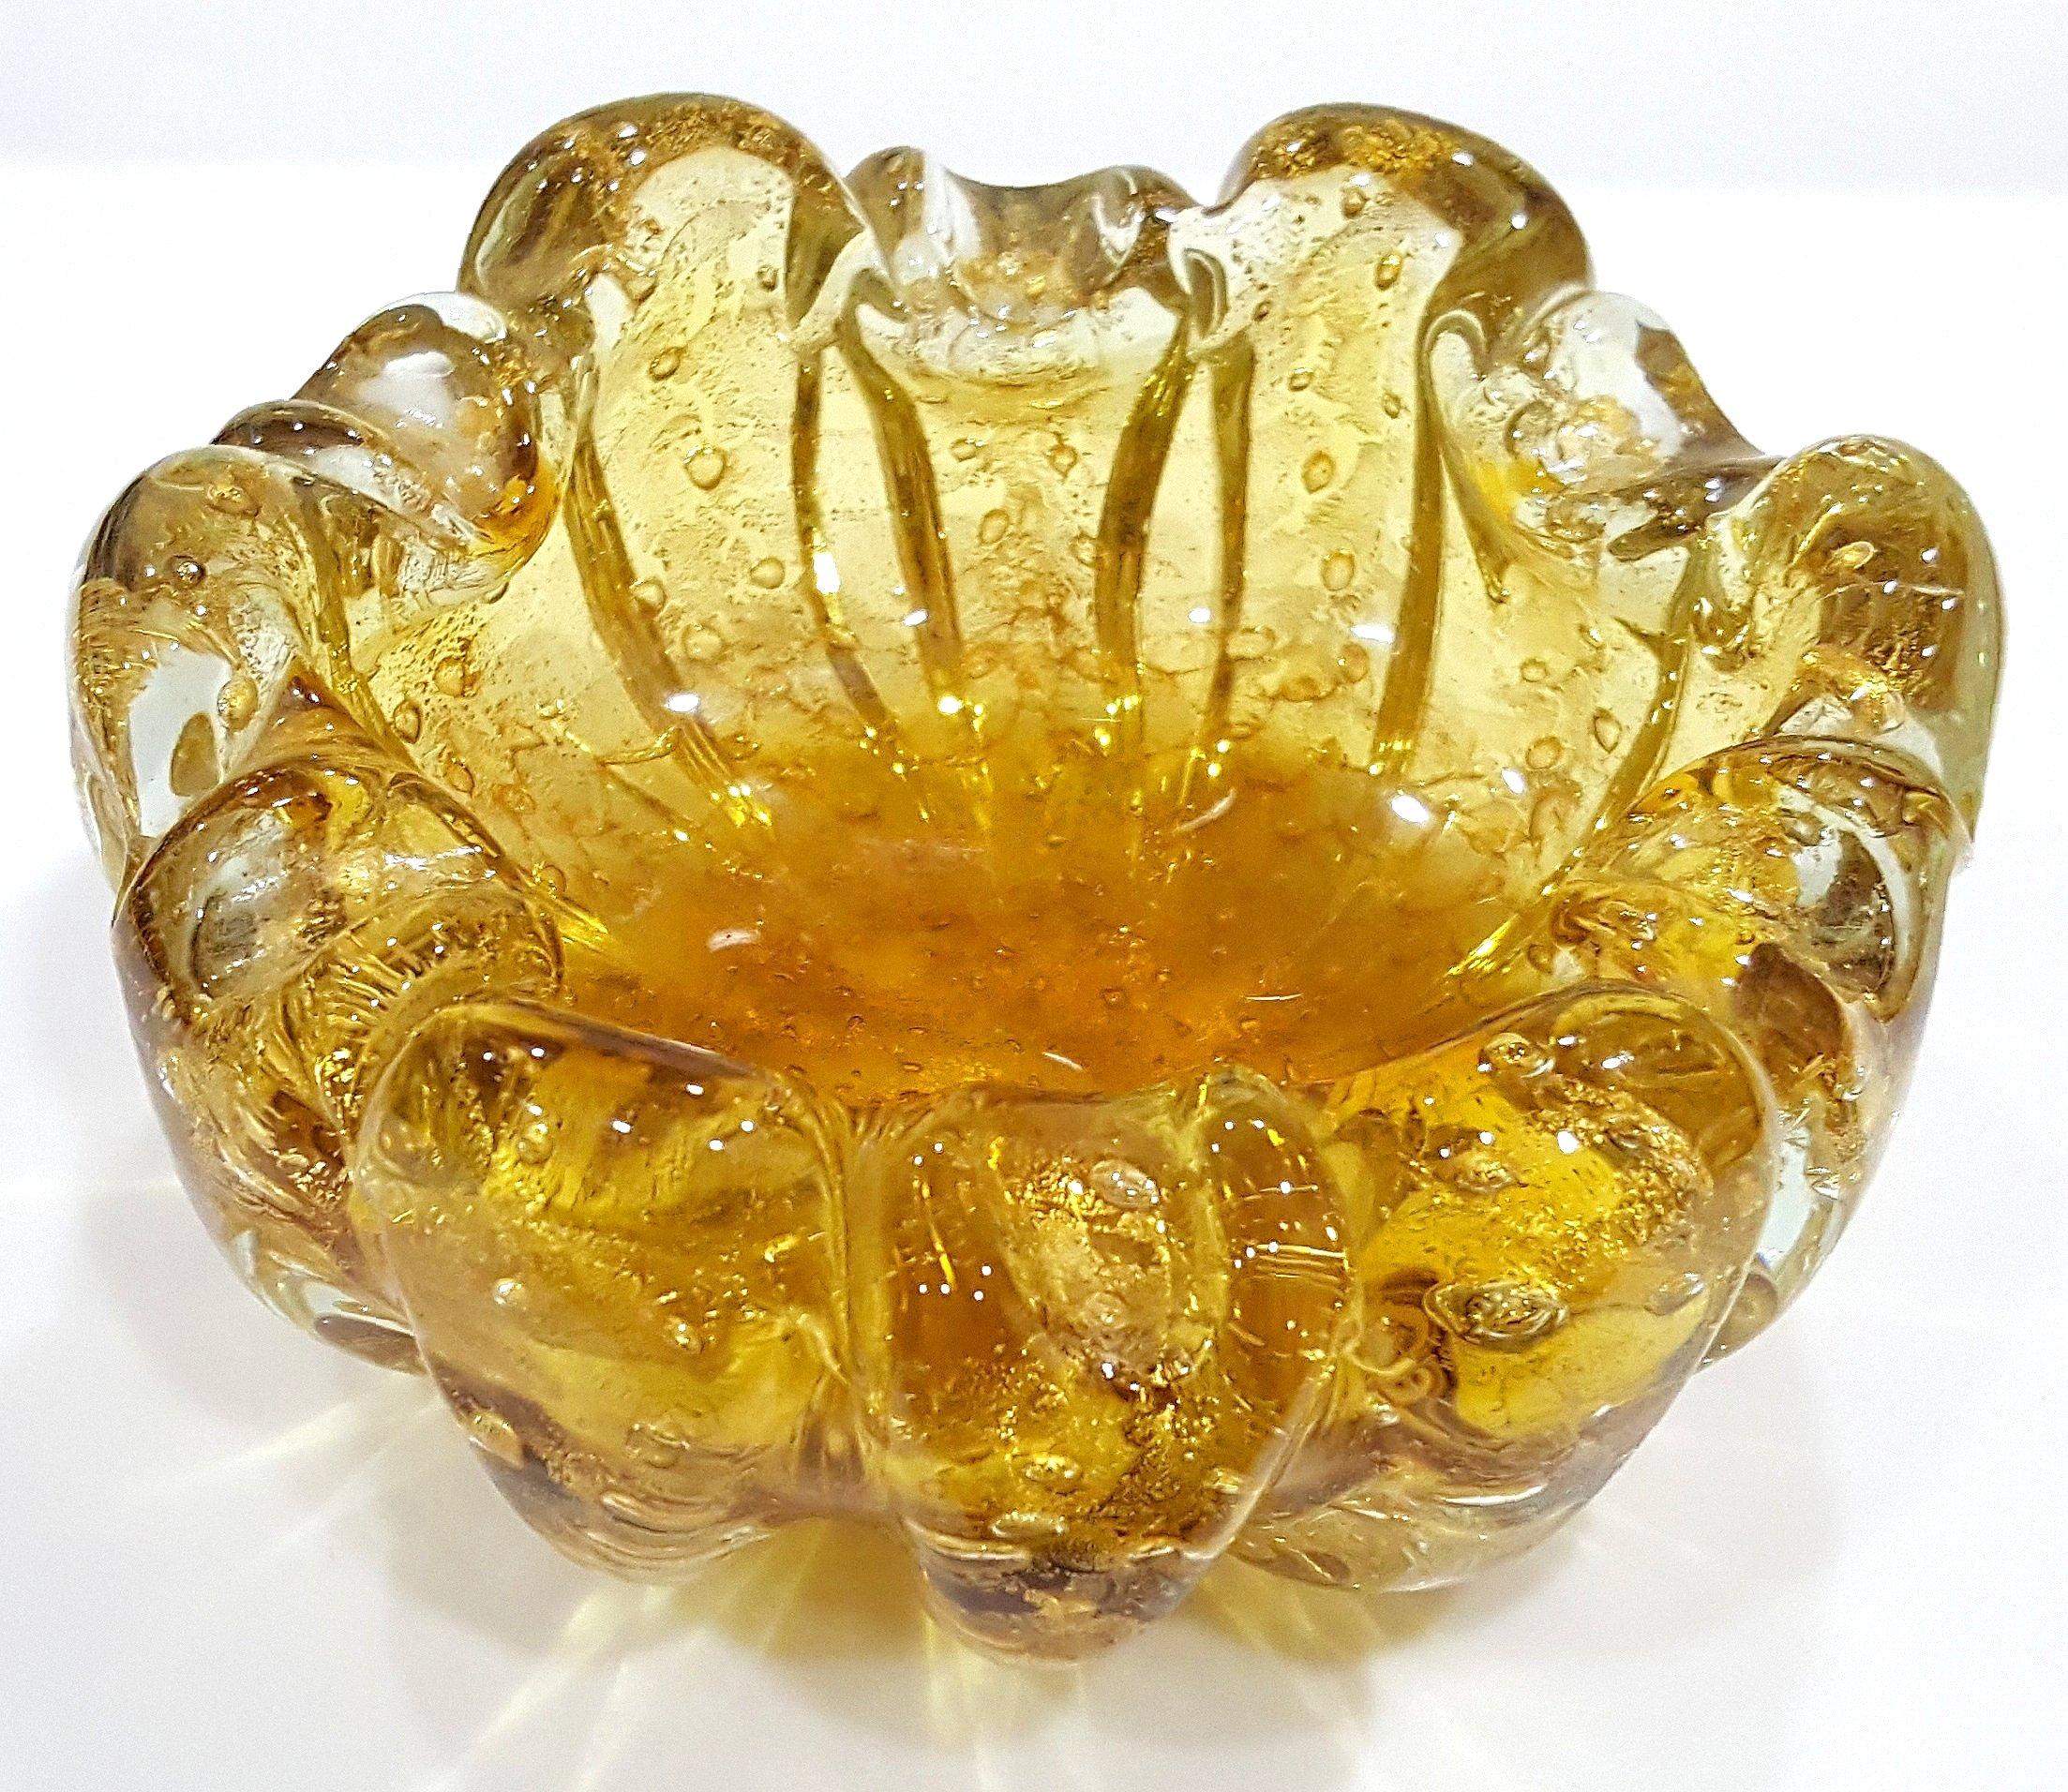 Murano Glass Barovier & Toso Gold Polveri & Bullicante Vintage Bowl/Ashtray/Dish.  
We suspect this is by Barovier & Toso though are not absolutely certain.
Good vintage condition.
Measurements are approximate and may vary throughout the piece.